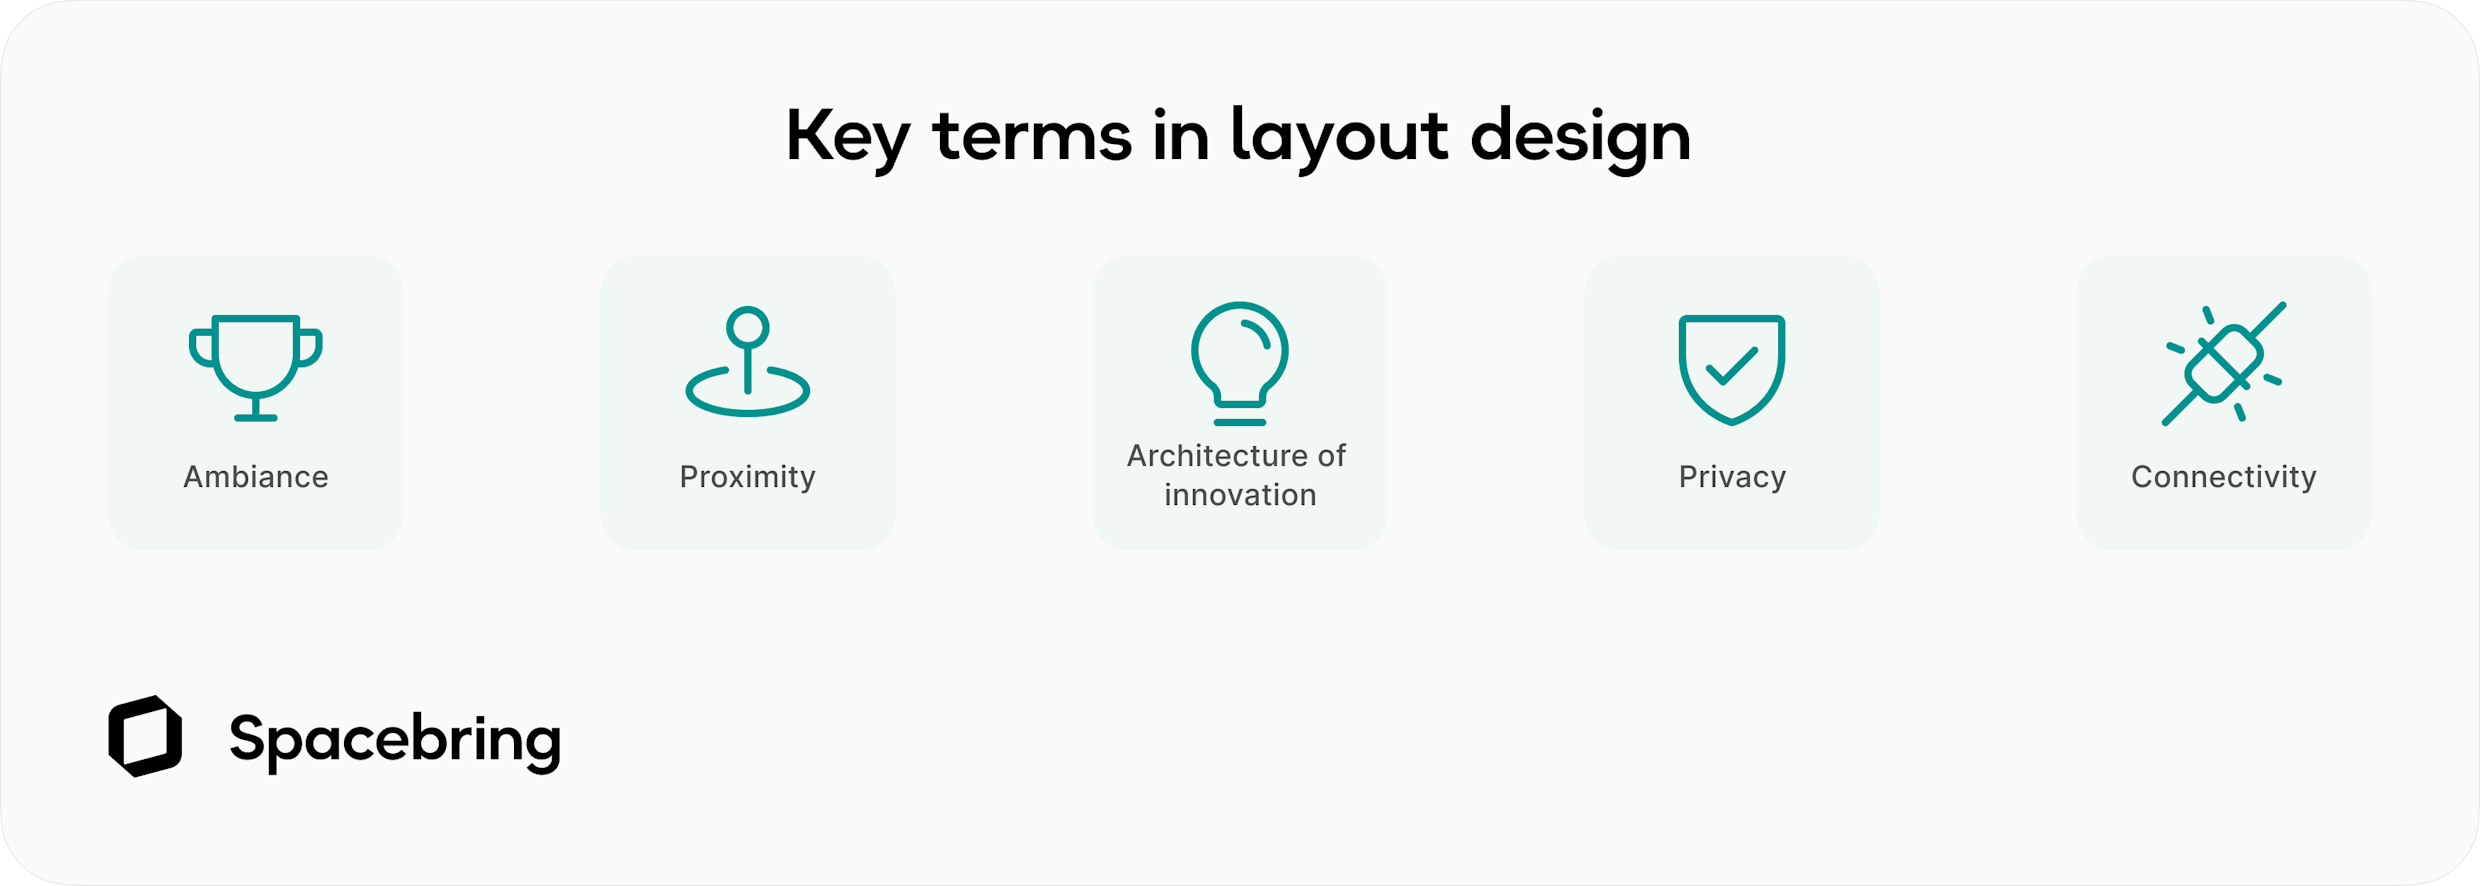 Key terms of coworking space layout design